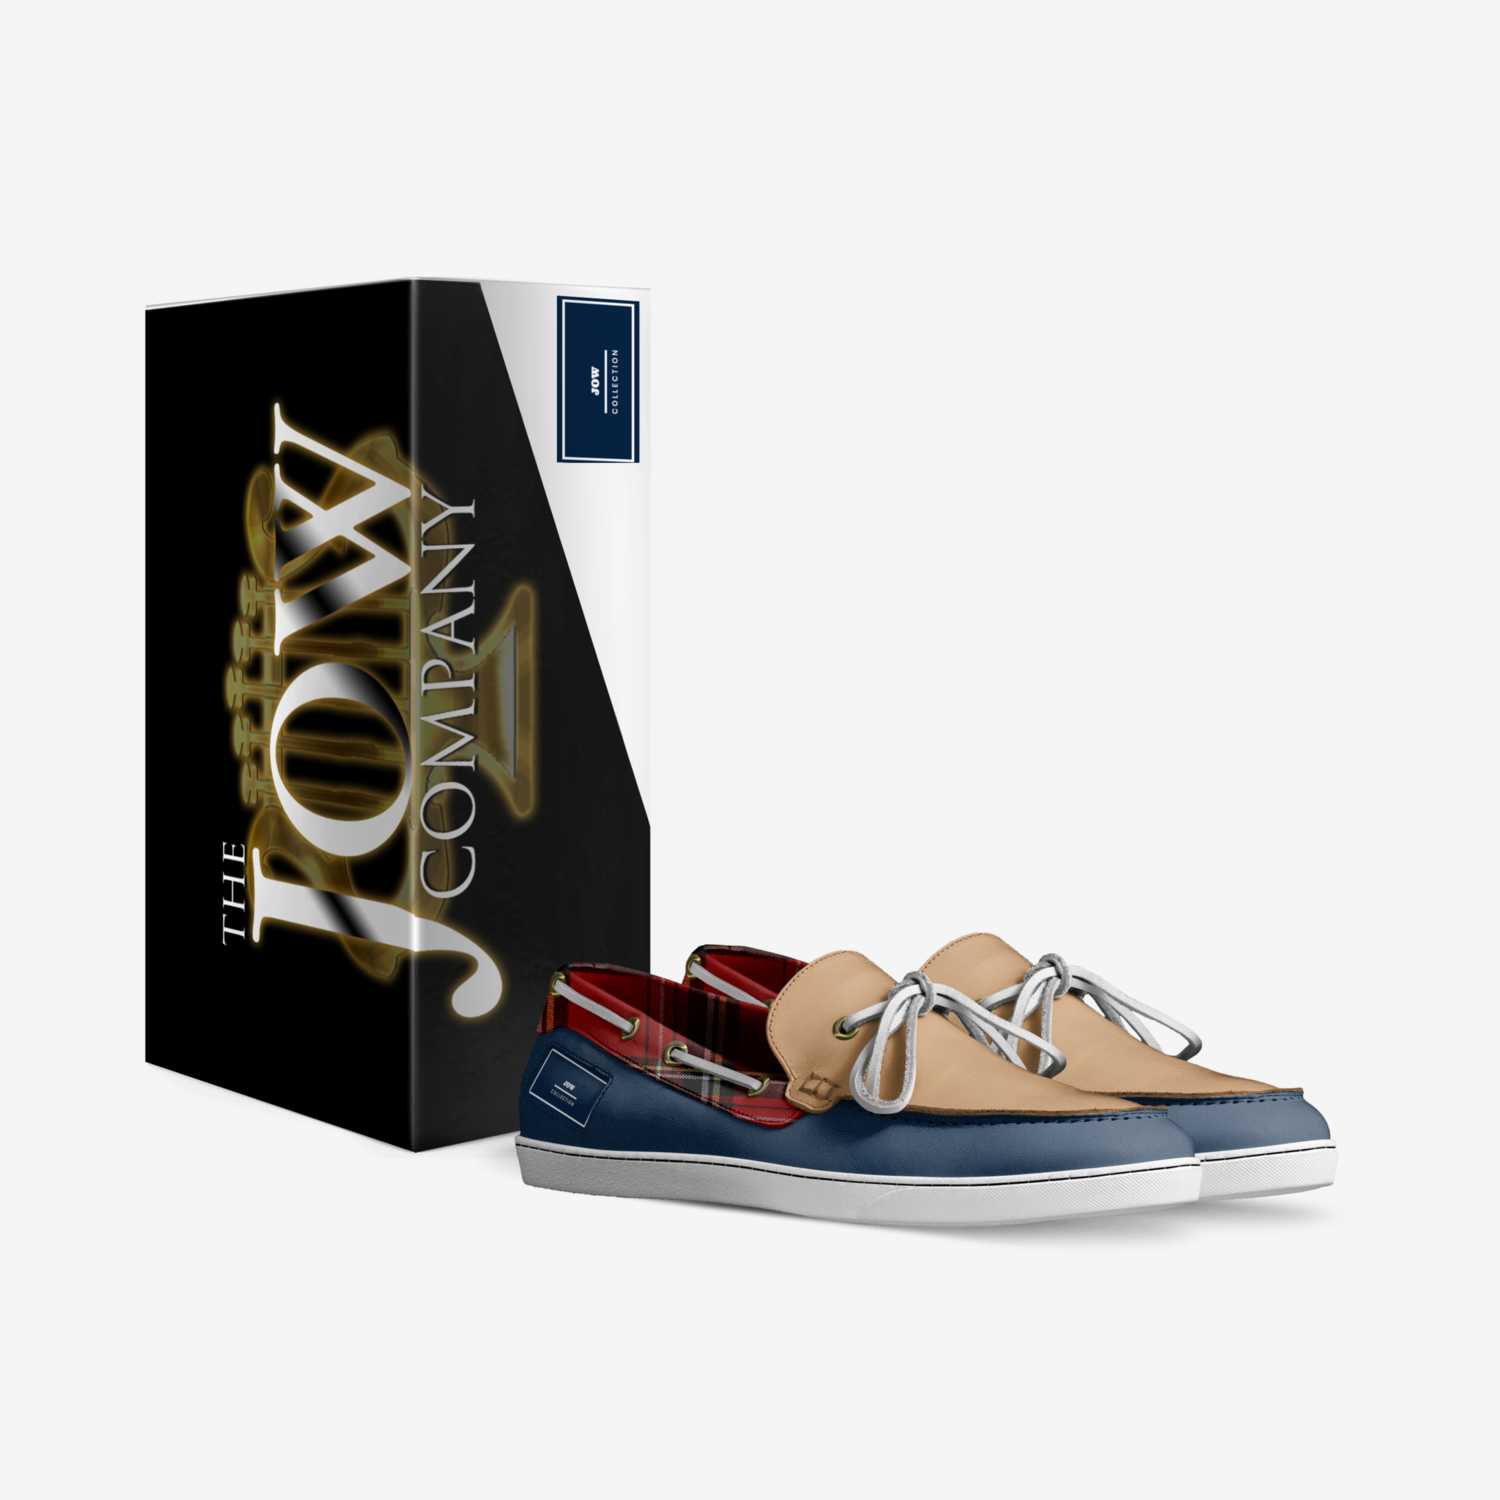 JOW custom made in Italy shoes by James White | Box view